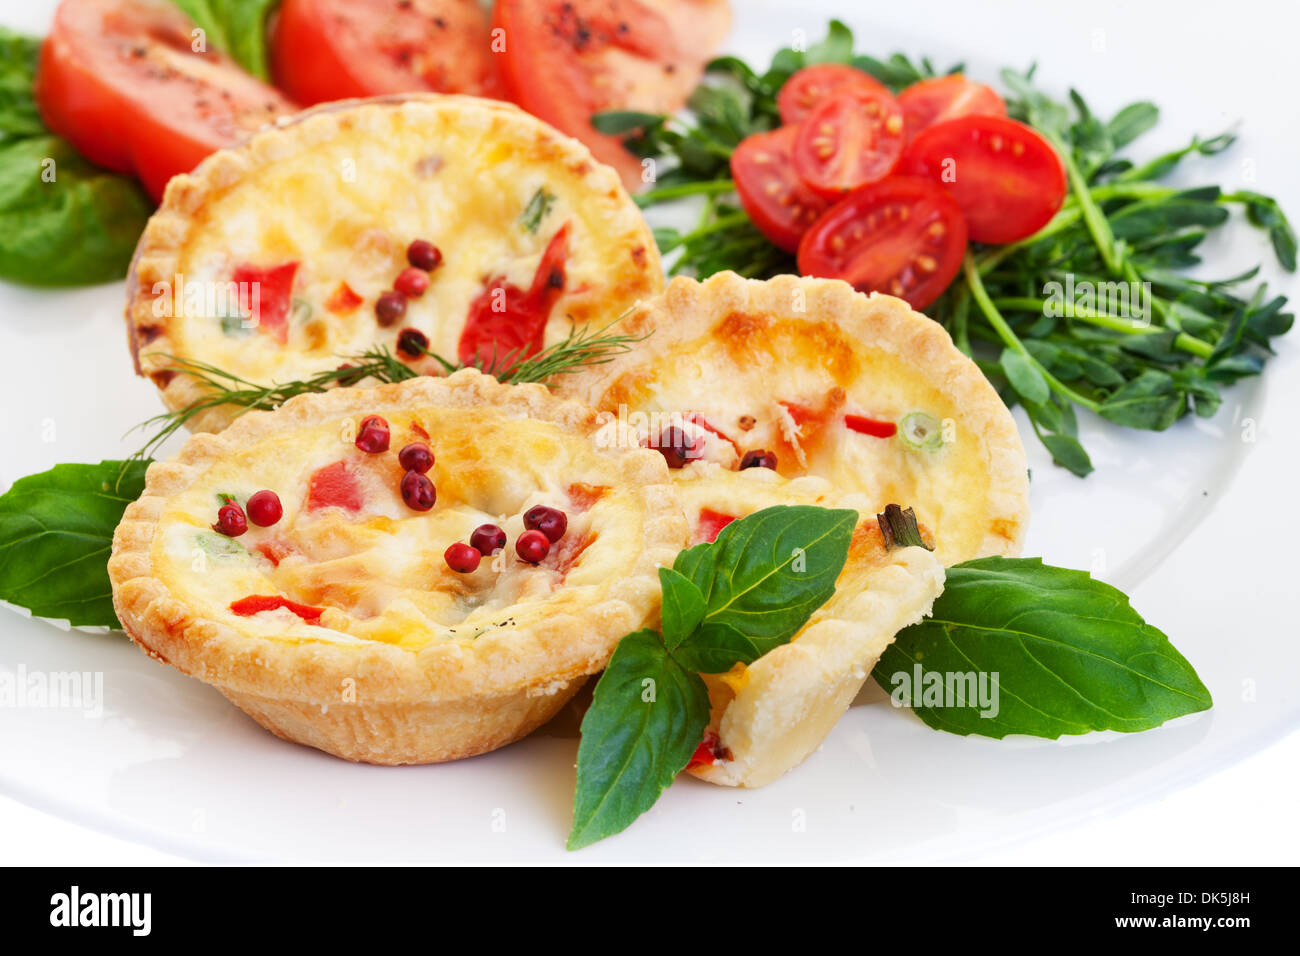 Mini quiche filled with vegetables with salad.Focus on the front pie. Stock Photo